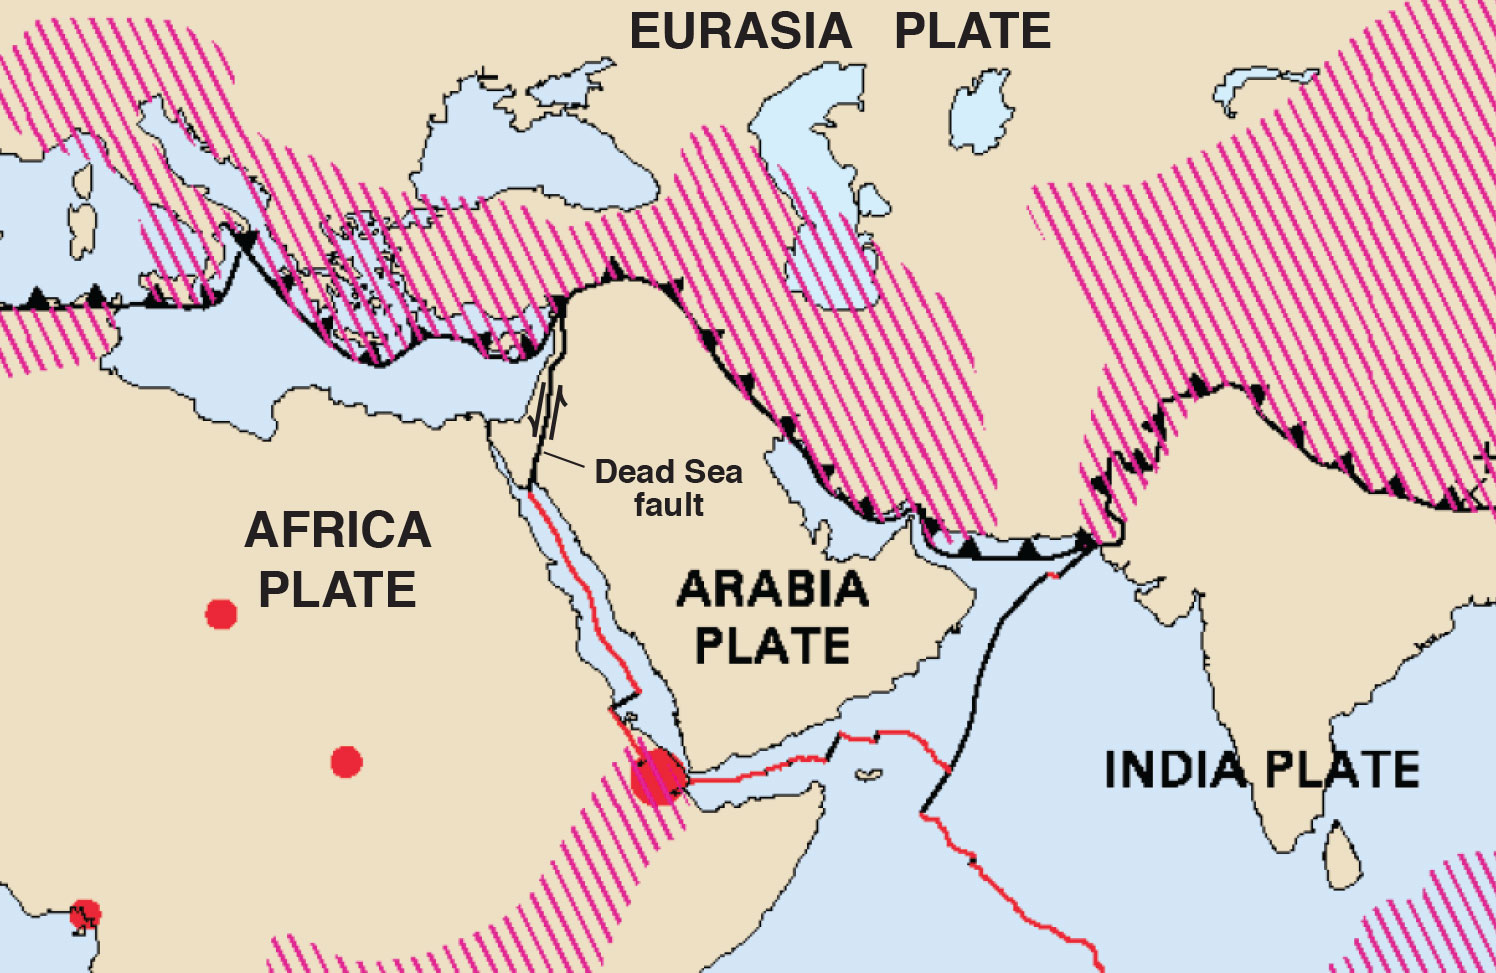 Tectonic regions shown along boundaries and in red diagonal stripes 